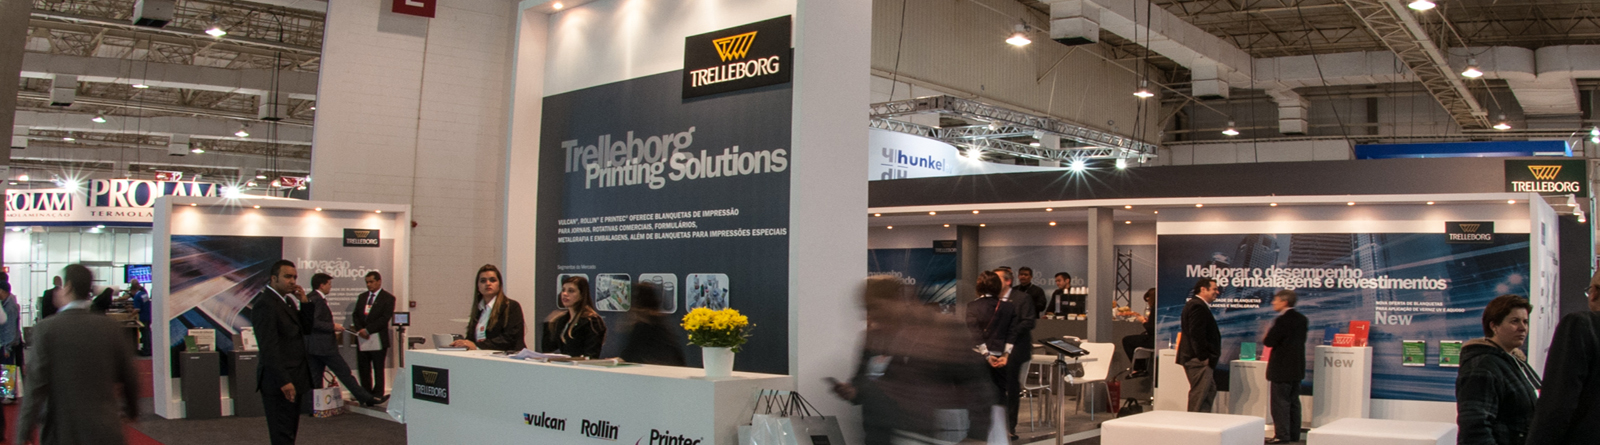 Trelleborg printing news and events